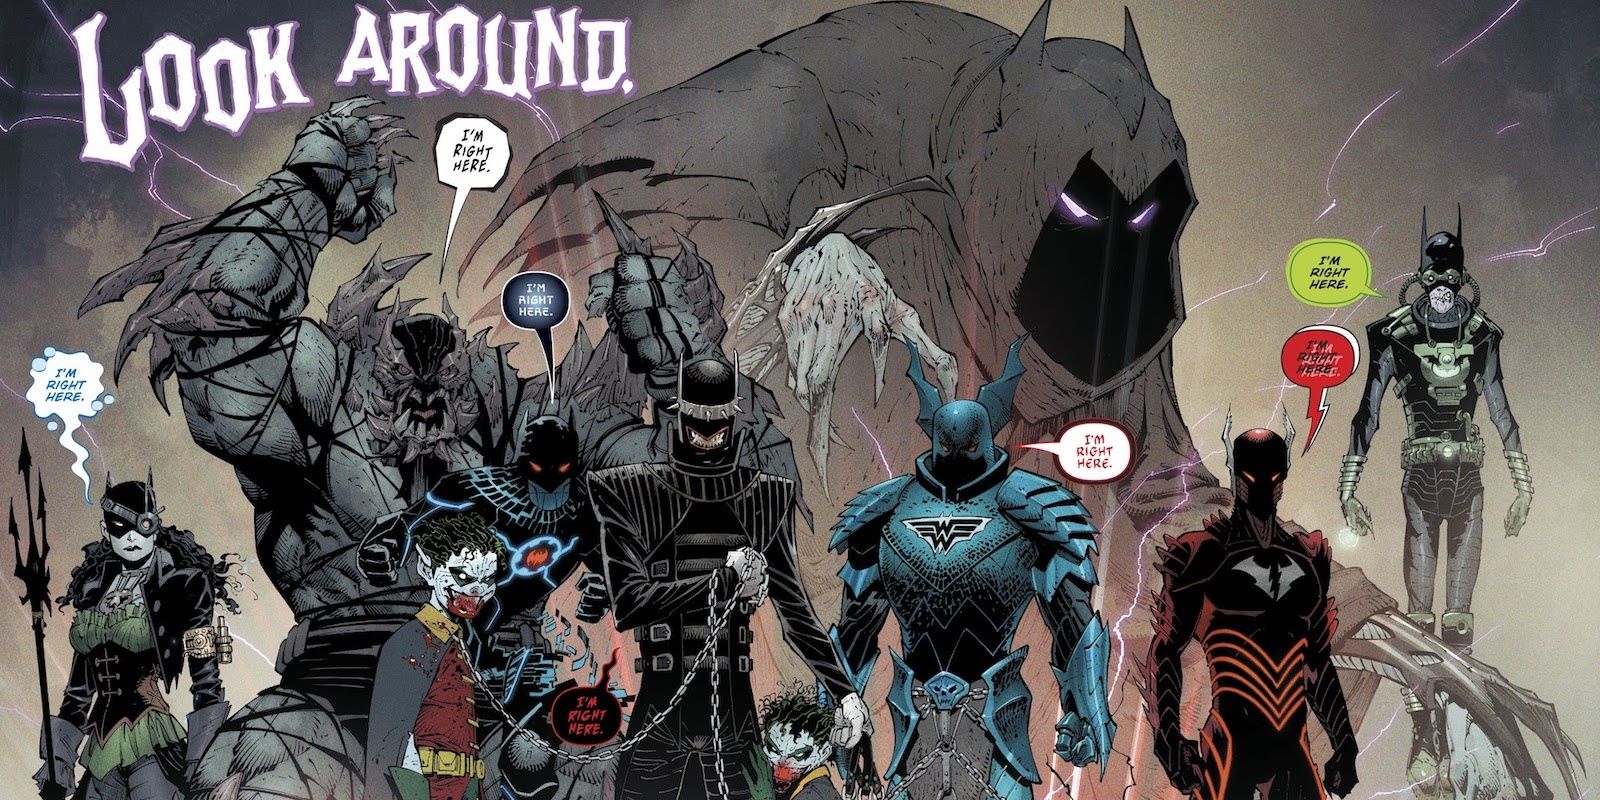 The seven Batmans in Dark Nights Metal ready to fight